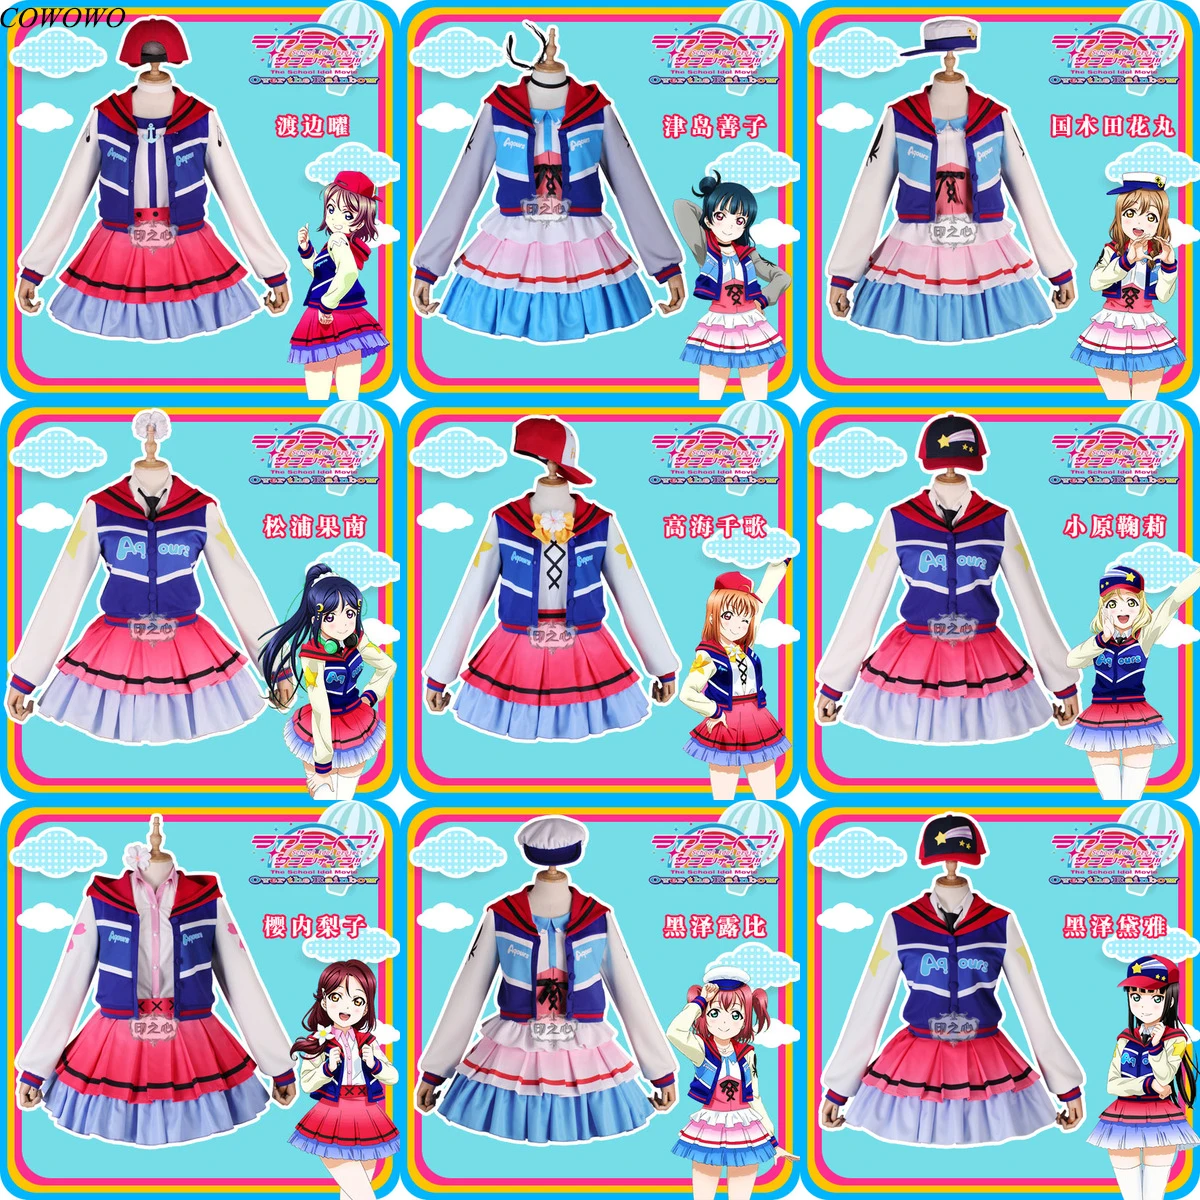 

Anime! Lovelive Aqours Next SPARKLING Over the Rainbow Ruby Dia Kanan Mari All Members sj Uniforms Cosplay Costume Free Shipping